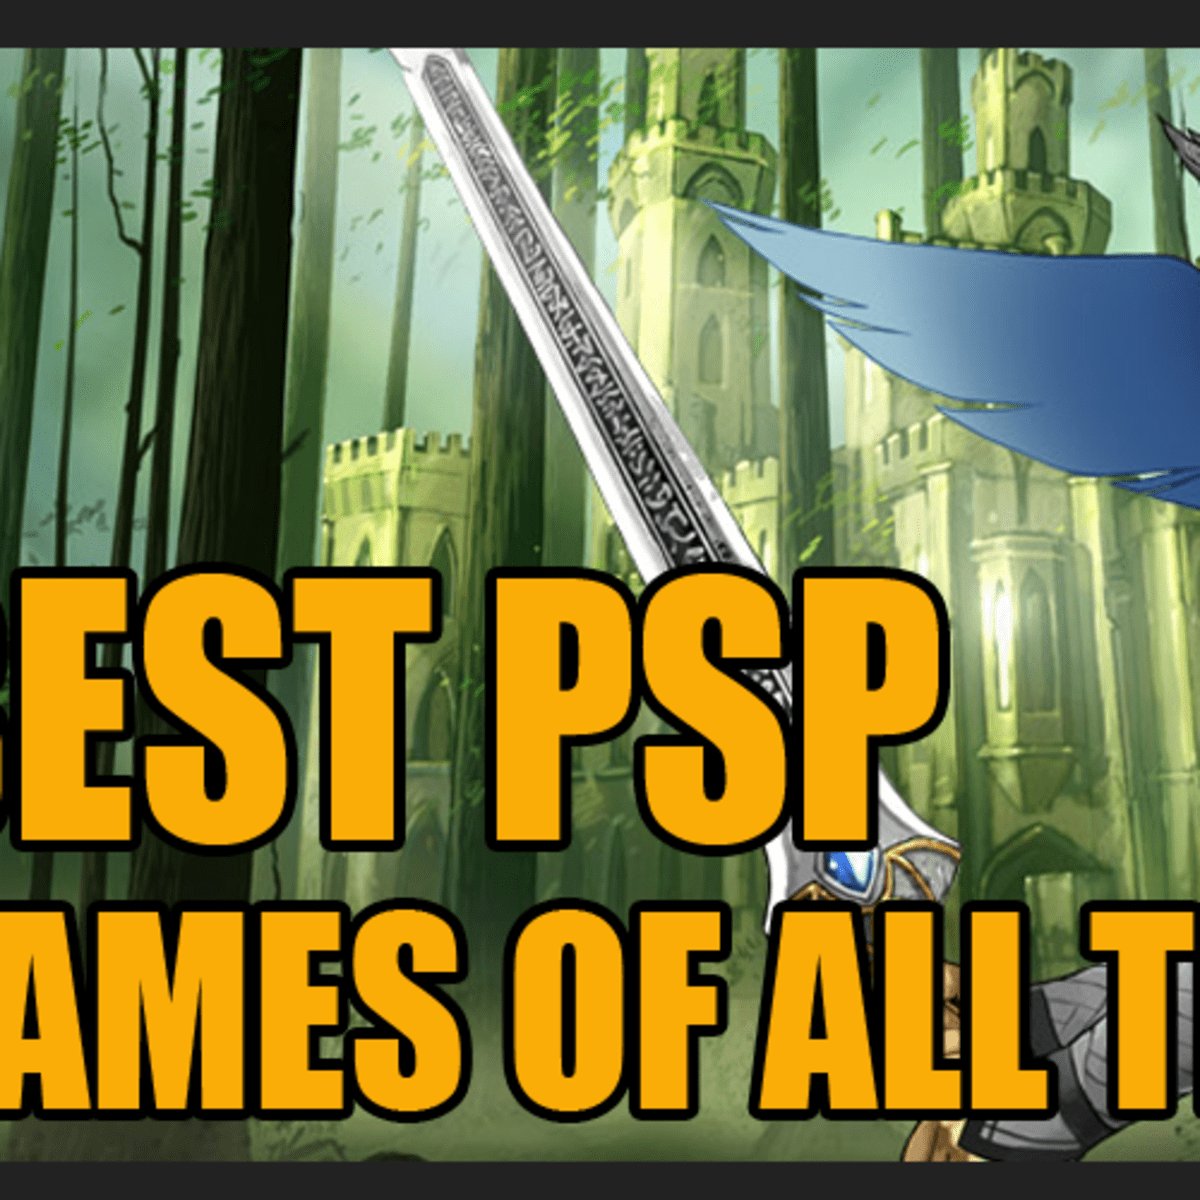 Top 10 Best PSP Games of all time - HubPages